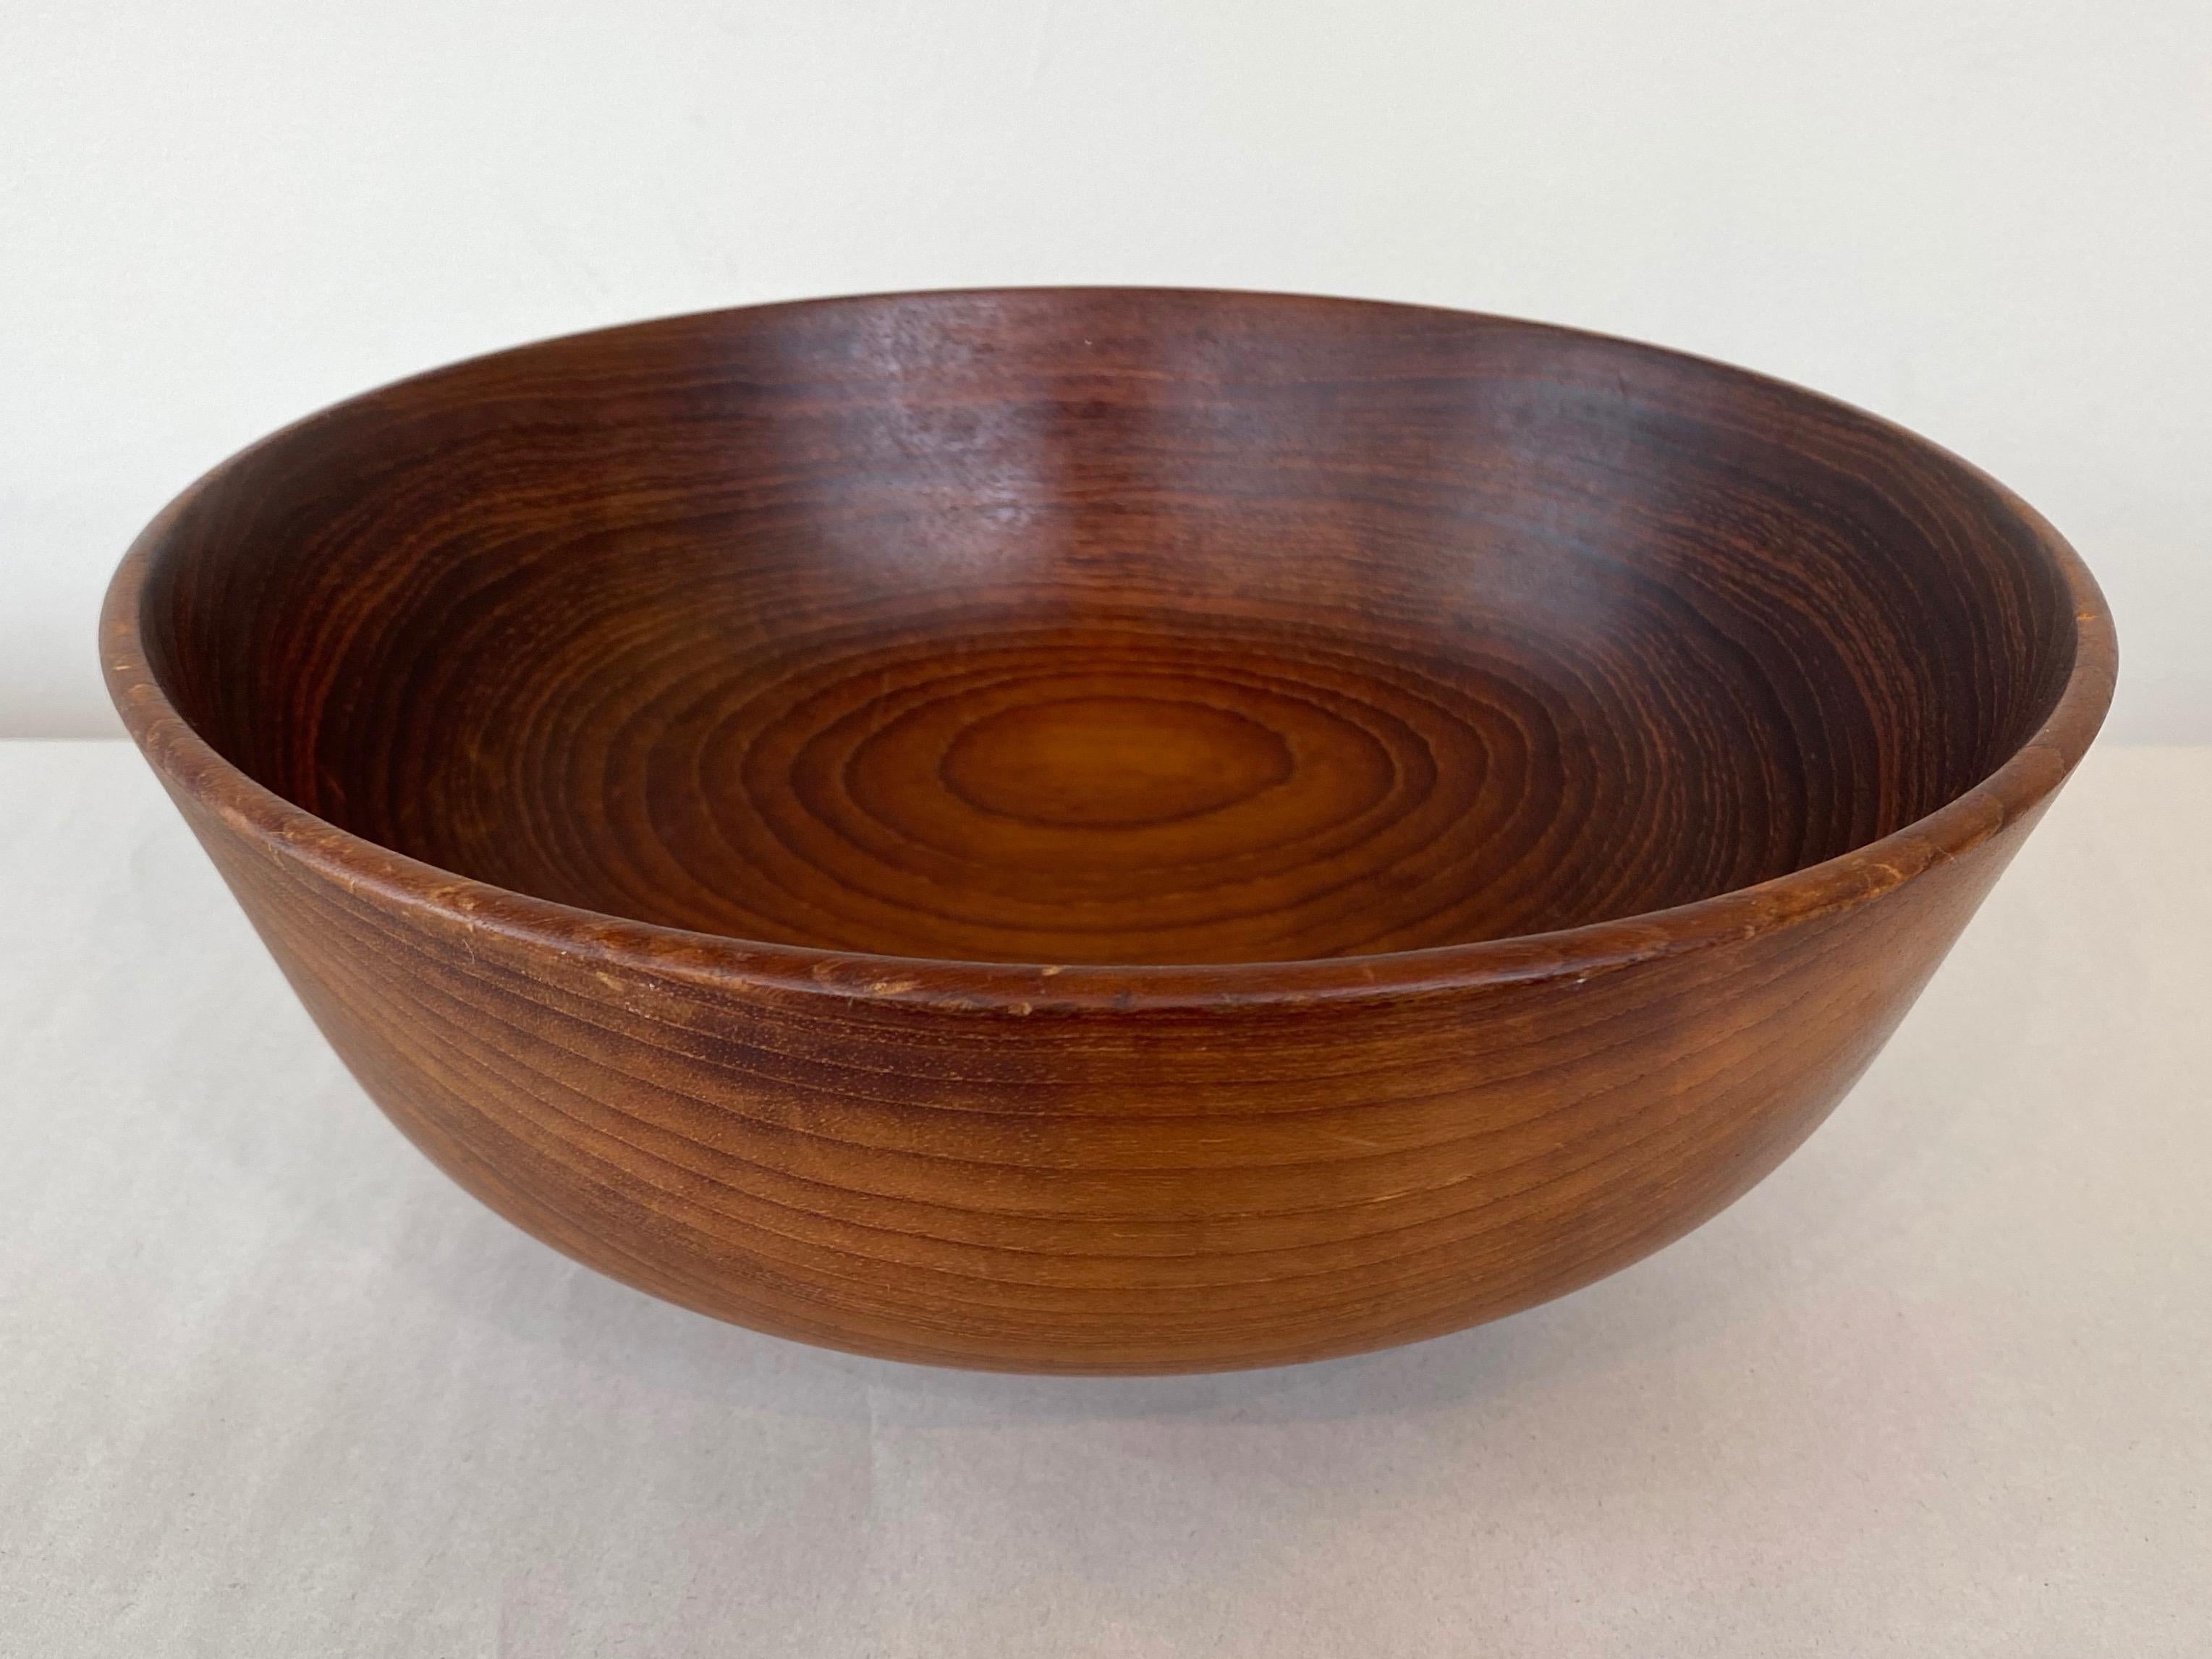 An especially well crafted early 1970s teak lathe-turned wood bowl with exceptional grain pattern by important and influential American master woodturner Bob Stocksdale (b. 1913–2003).

Distinguished by a visually striking and technically demanding